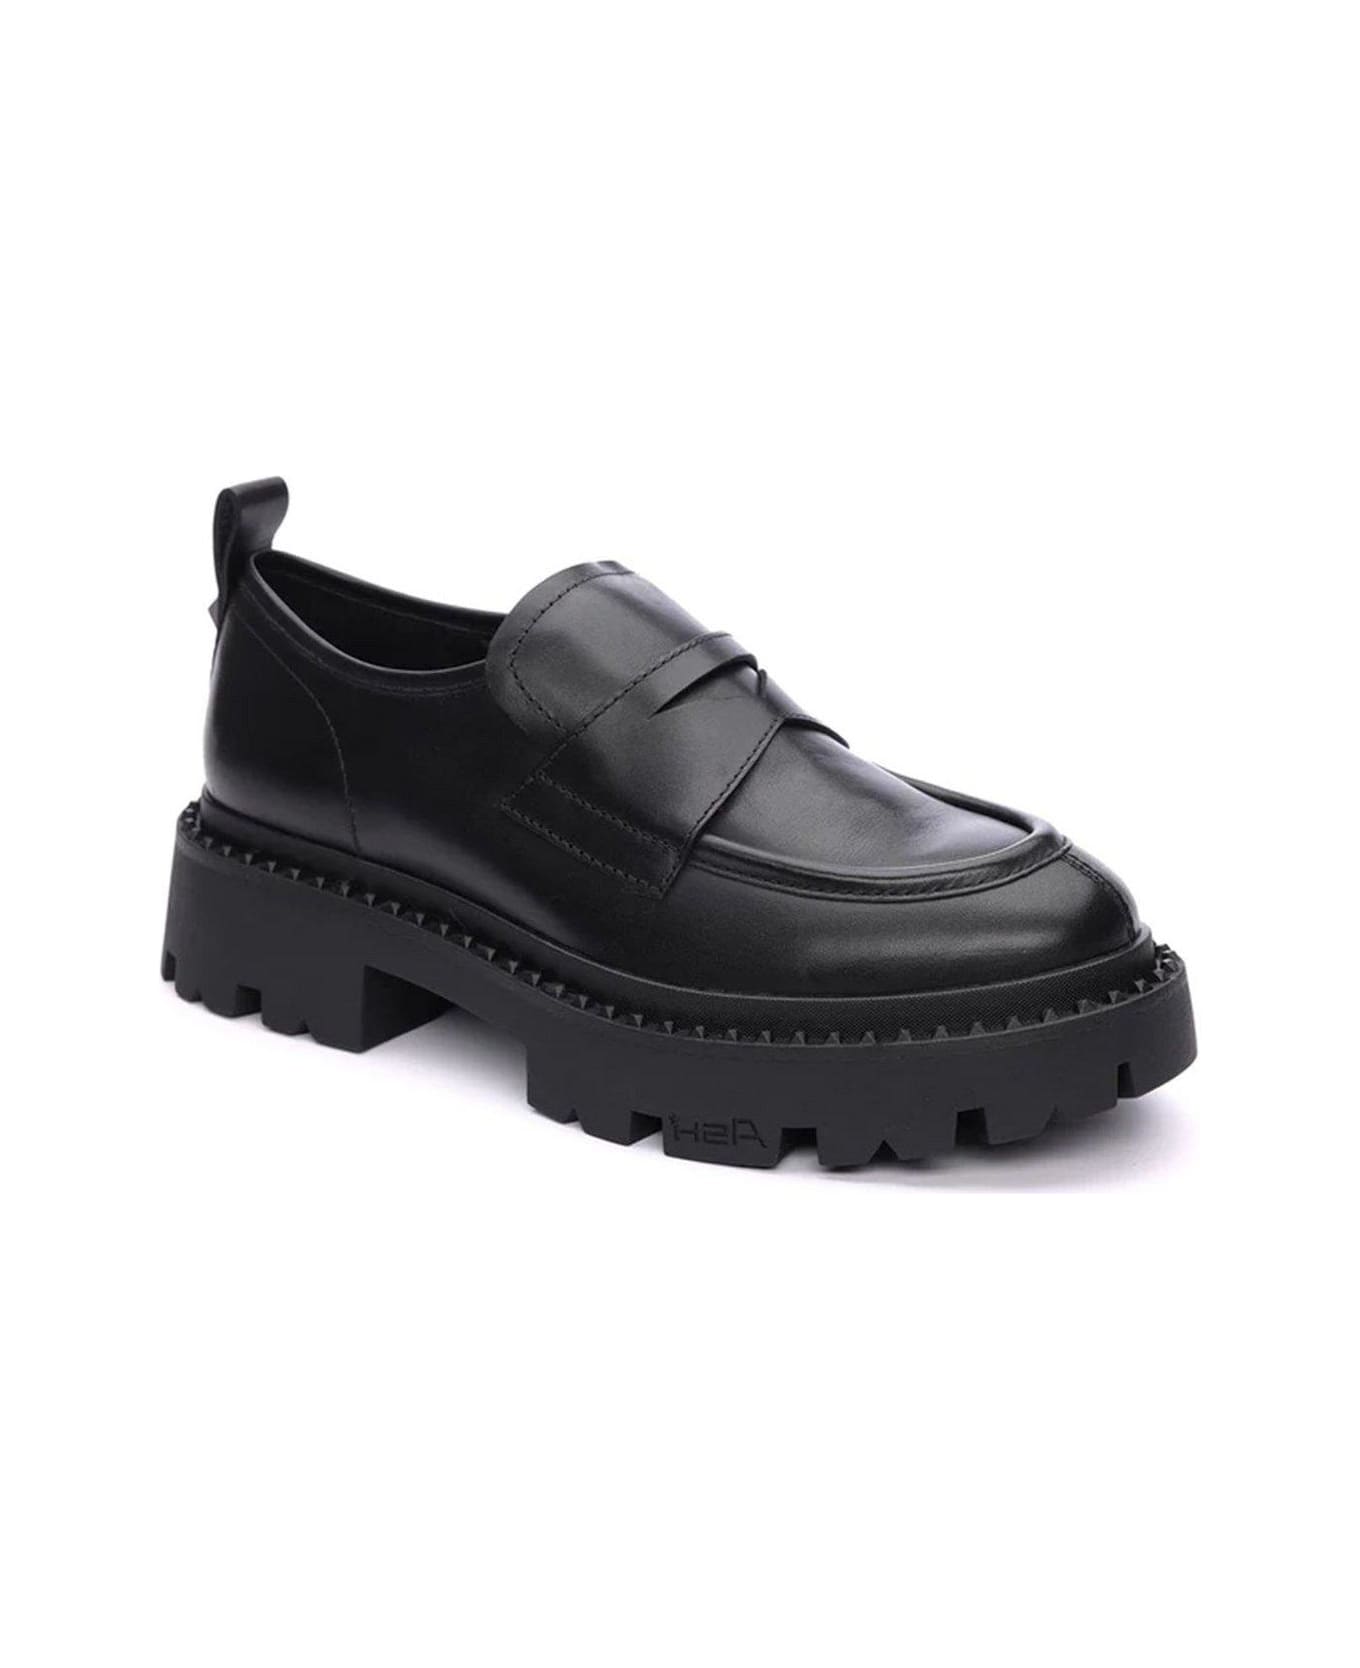 Ash Stud-detailed Slip-on Loafers Flat Shoes - NERO